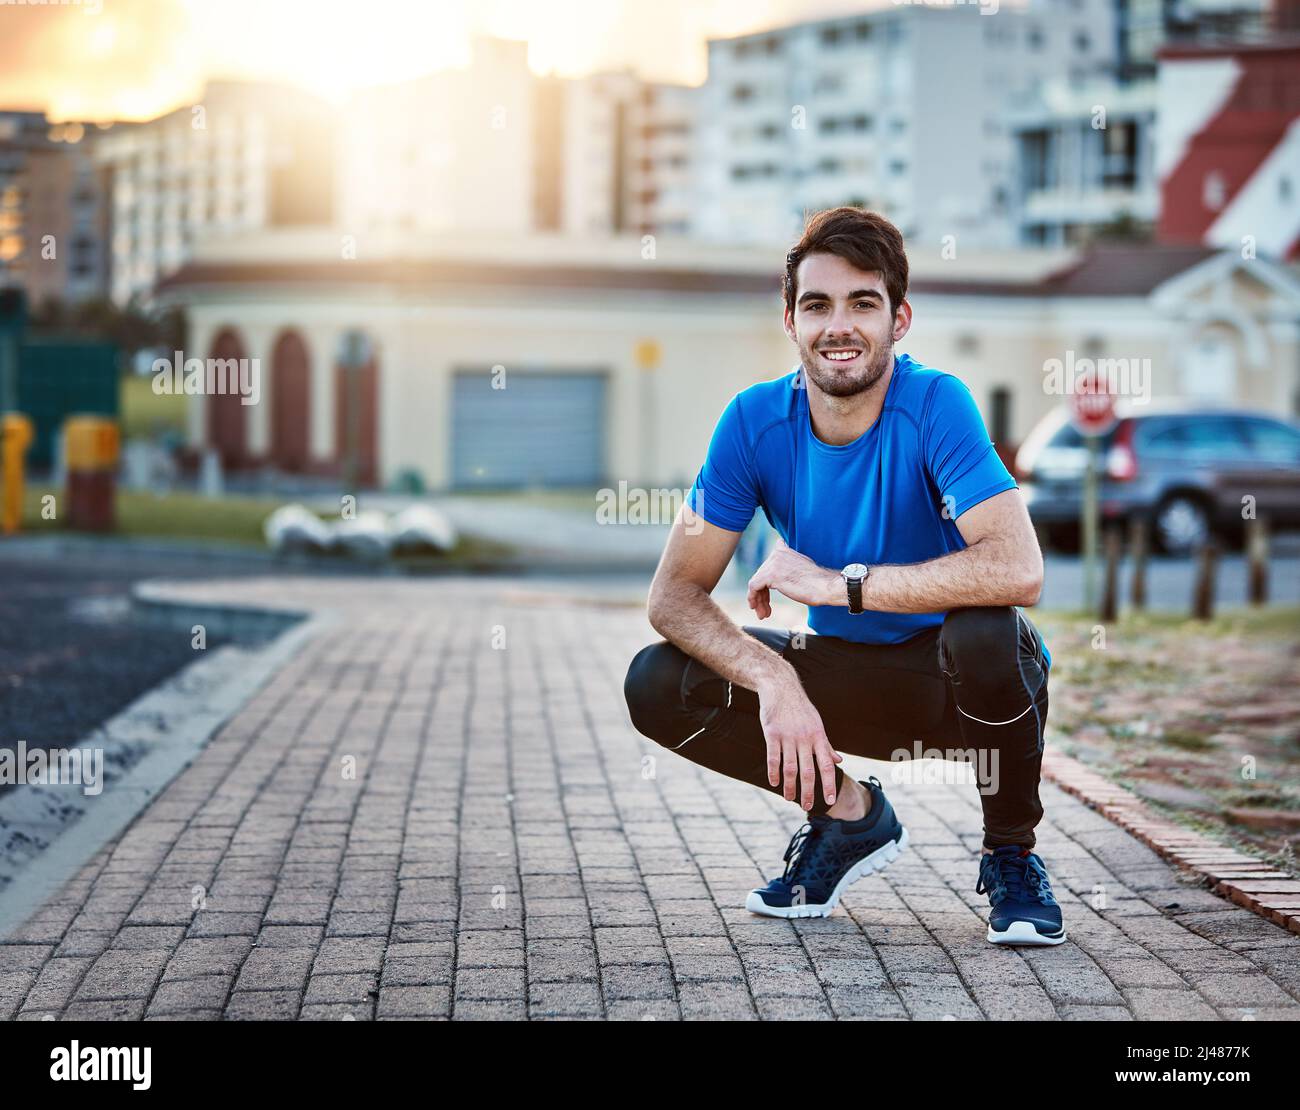 https://c8.alamy.com/comp/2J4877K/im-more-of-a-pavement-pounder-than-a-gym-rat-shot-of-a-handsome-young-man-exercising-outdoors-2J4877K.jpg